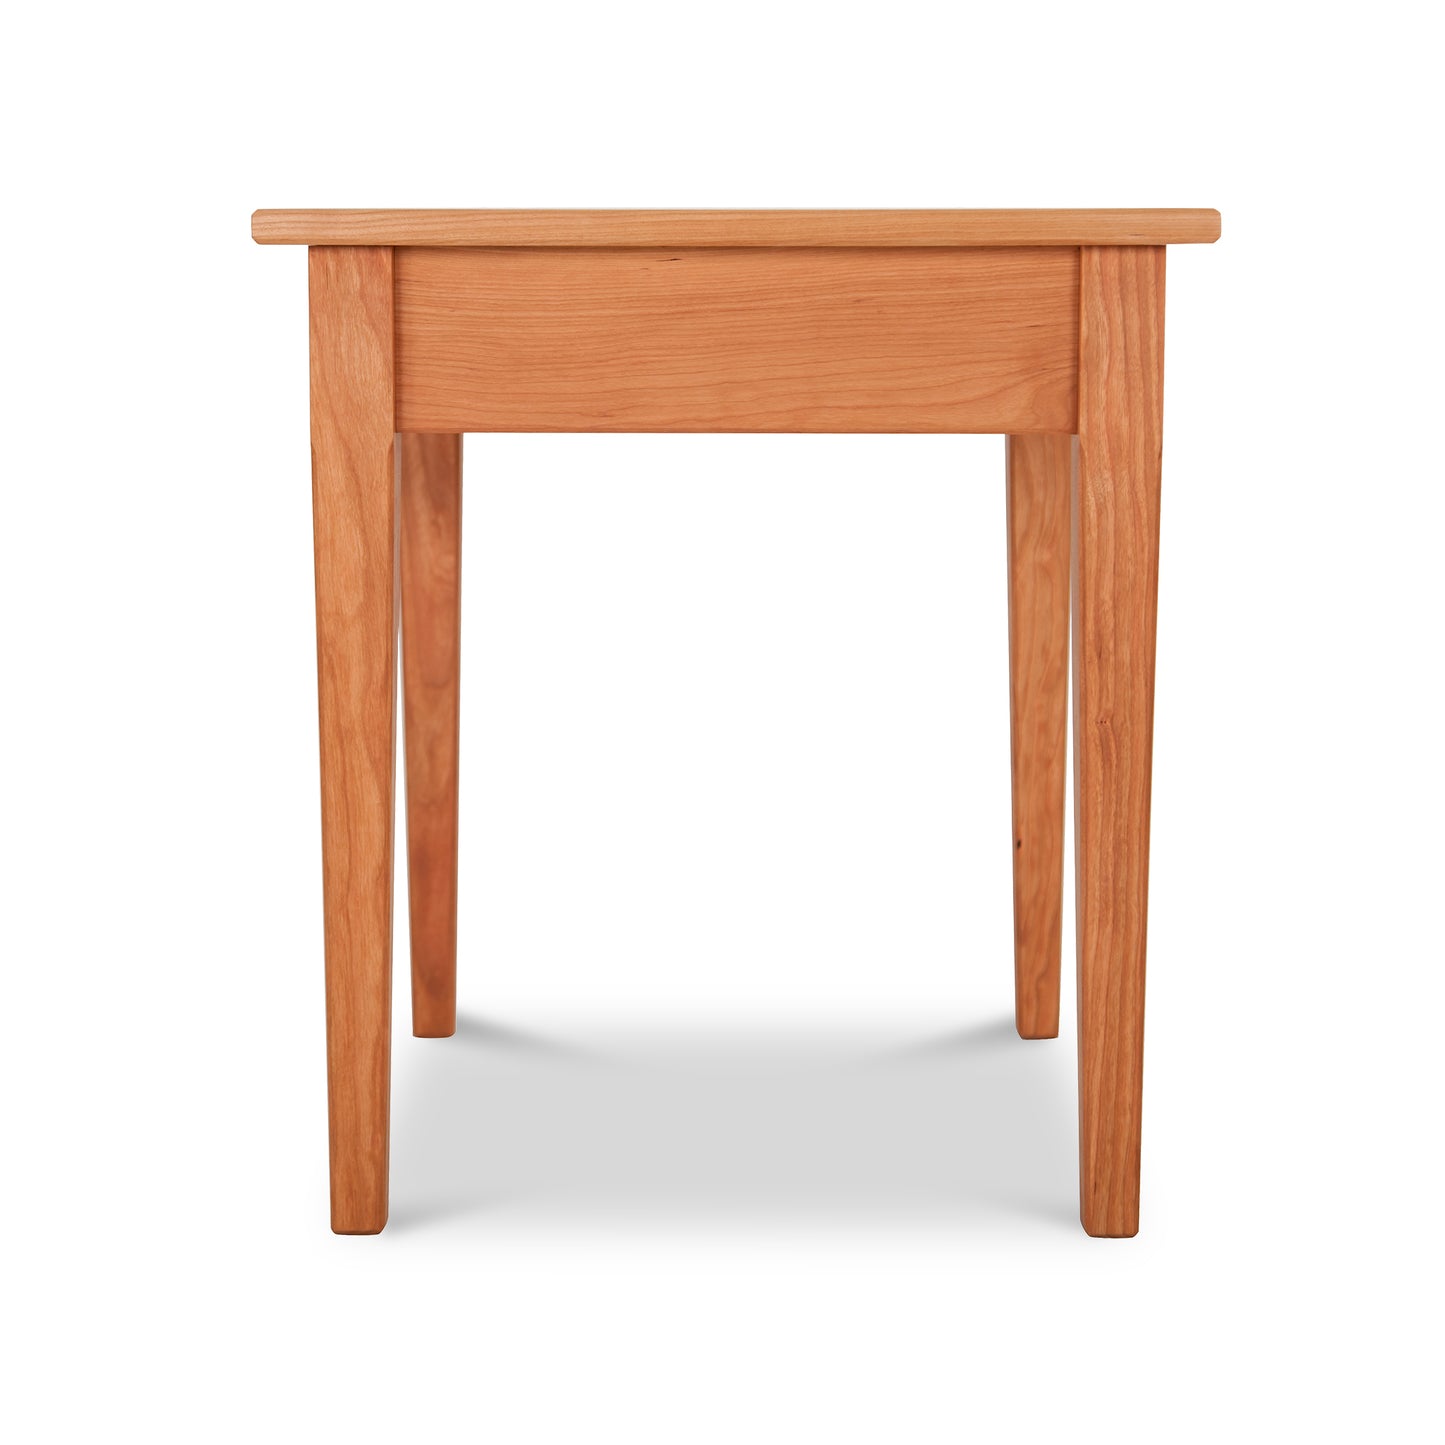 A Vermont Shaker End Table - Ready to Ship by Maple Corner Woodworks on a white background.